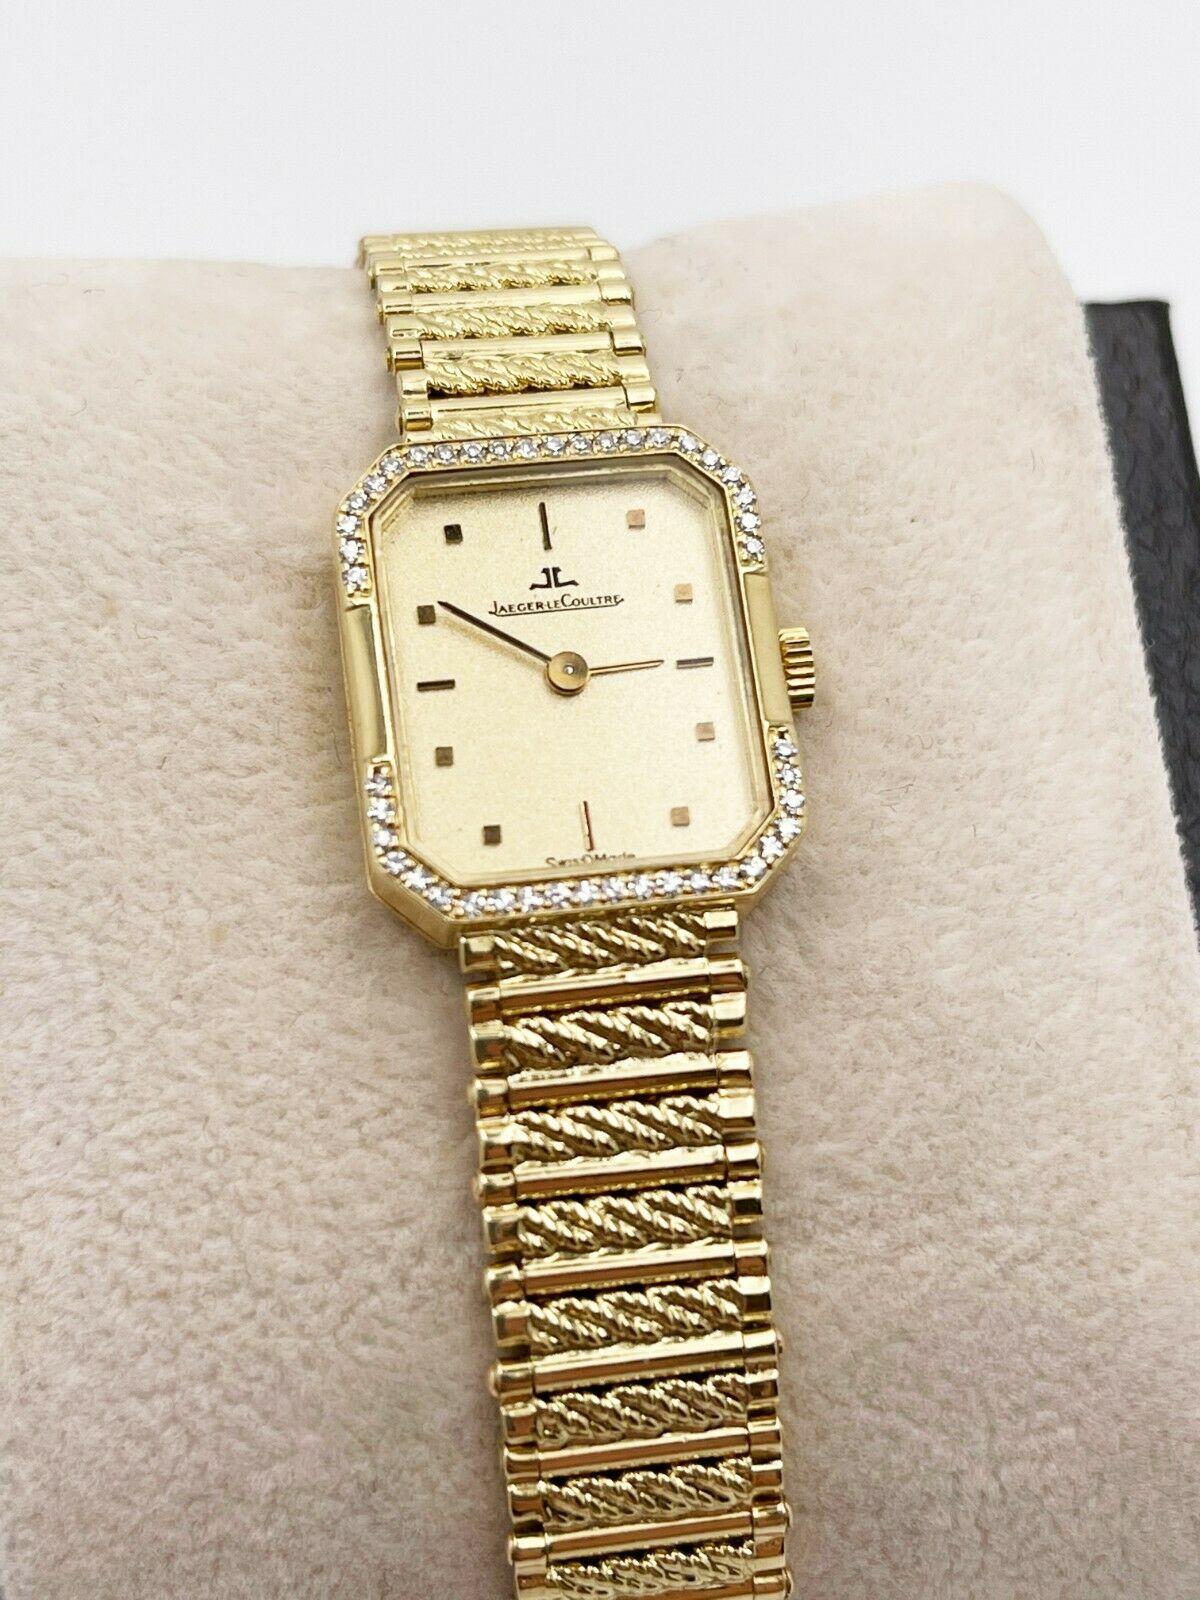 Case Material: 18K Yellow Gold

 

Band: 18K Yellow Gold

 

Bezel: Diamond Bezel 

 

Dial: Champagne 

 

Face: Sapphire Crystal 

 

Case Size: Approx 18mm including crown

 

Includes: 

-Elegant Watch Box

-Certified Appraisal 

-1 Year